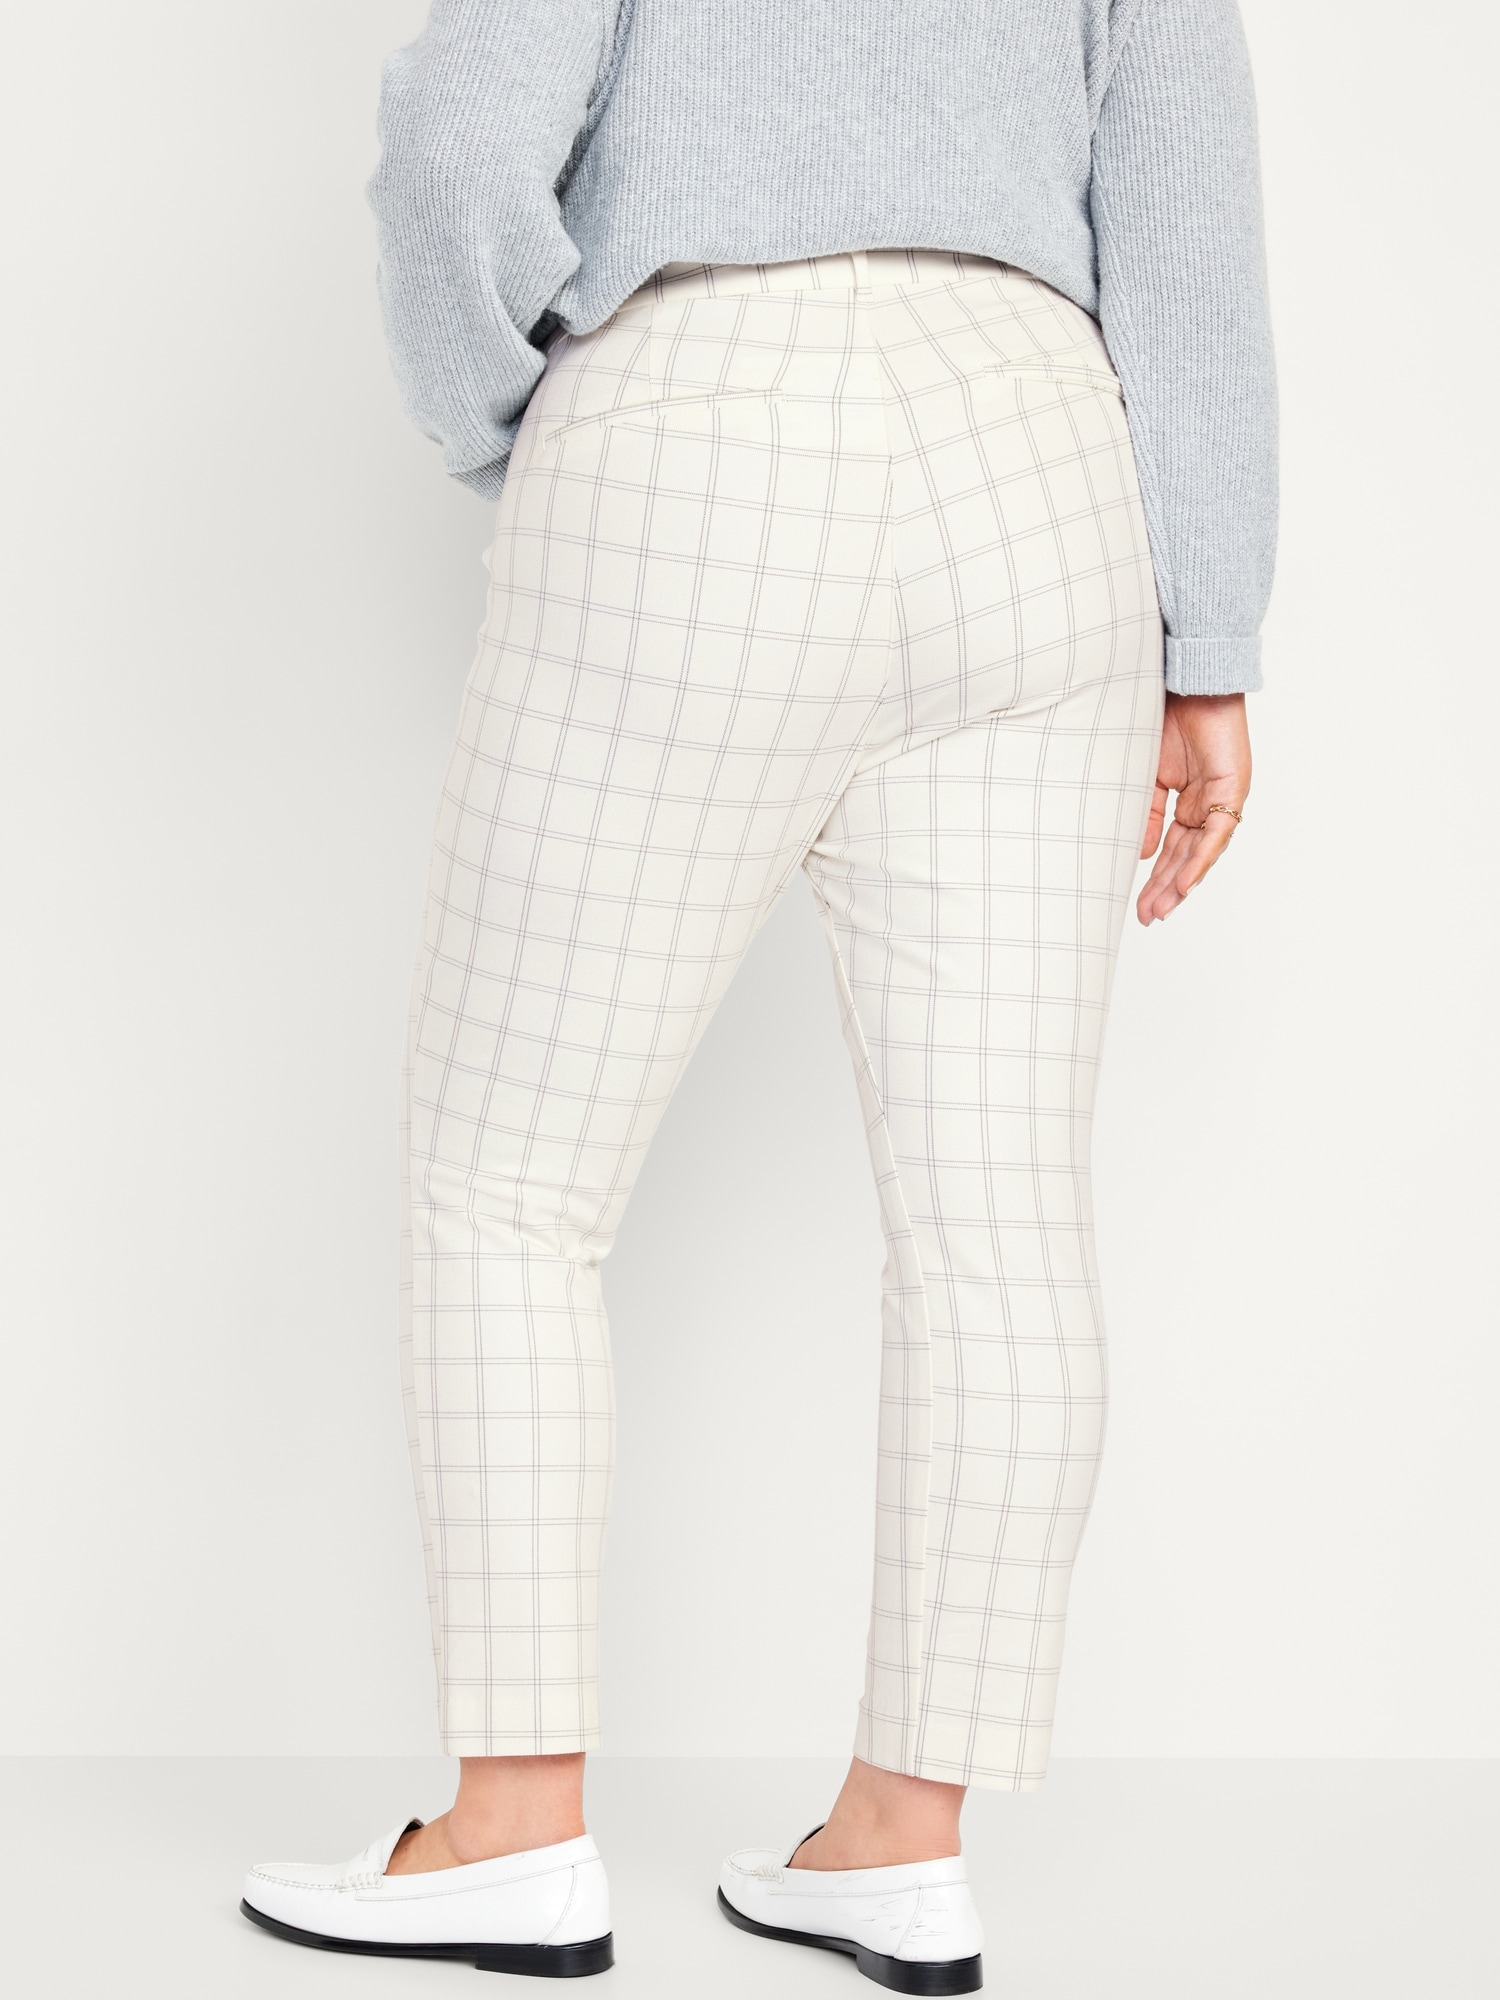 Women's High-Rise Slim Fit Ankle Pants - A New Day Gray Windowpane Check 10